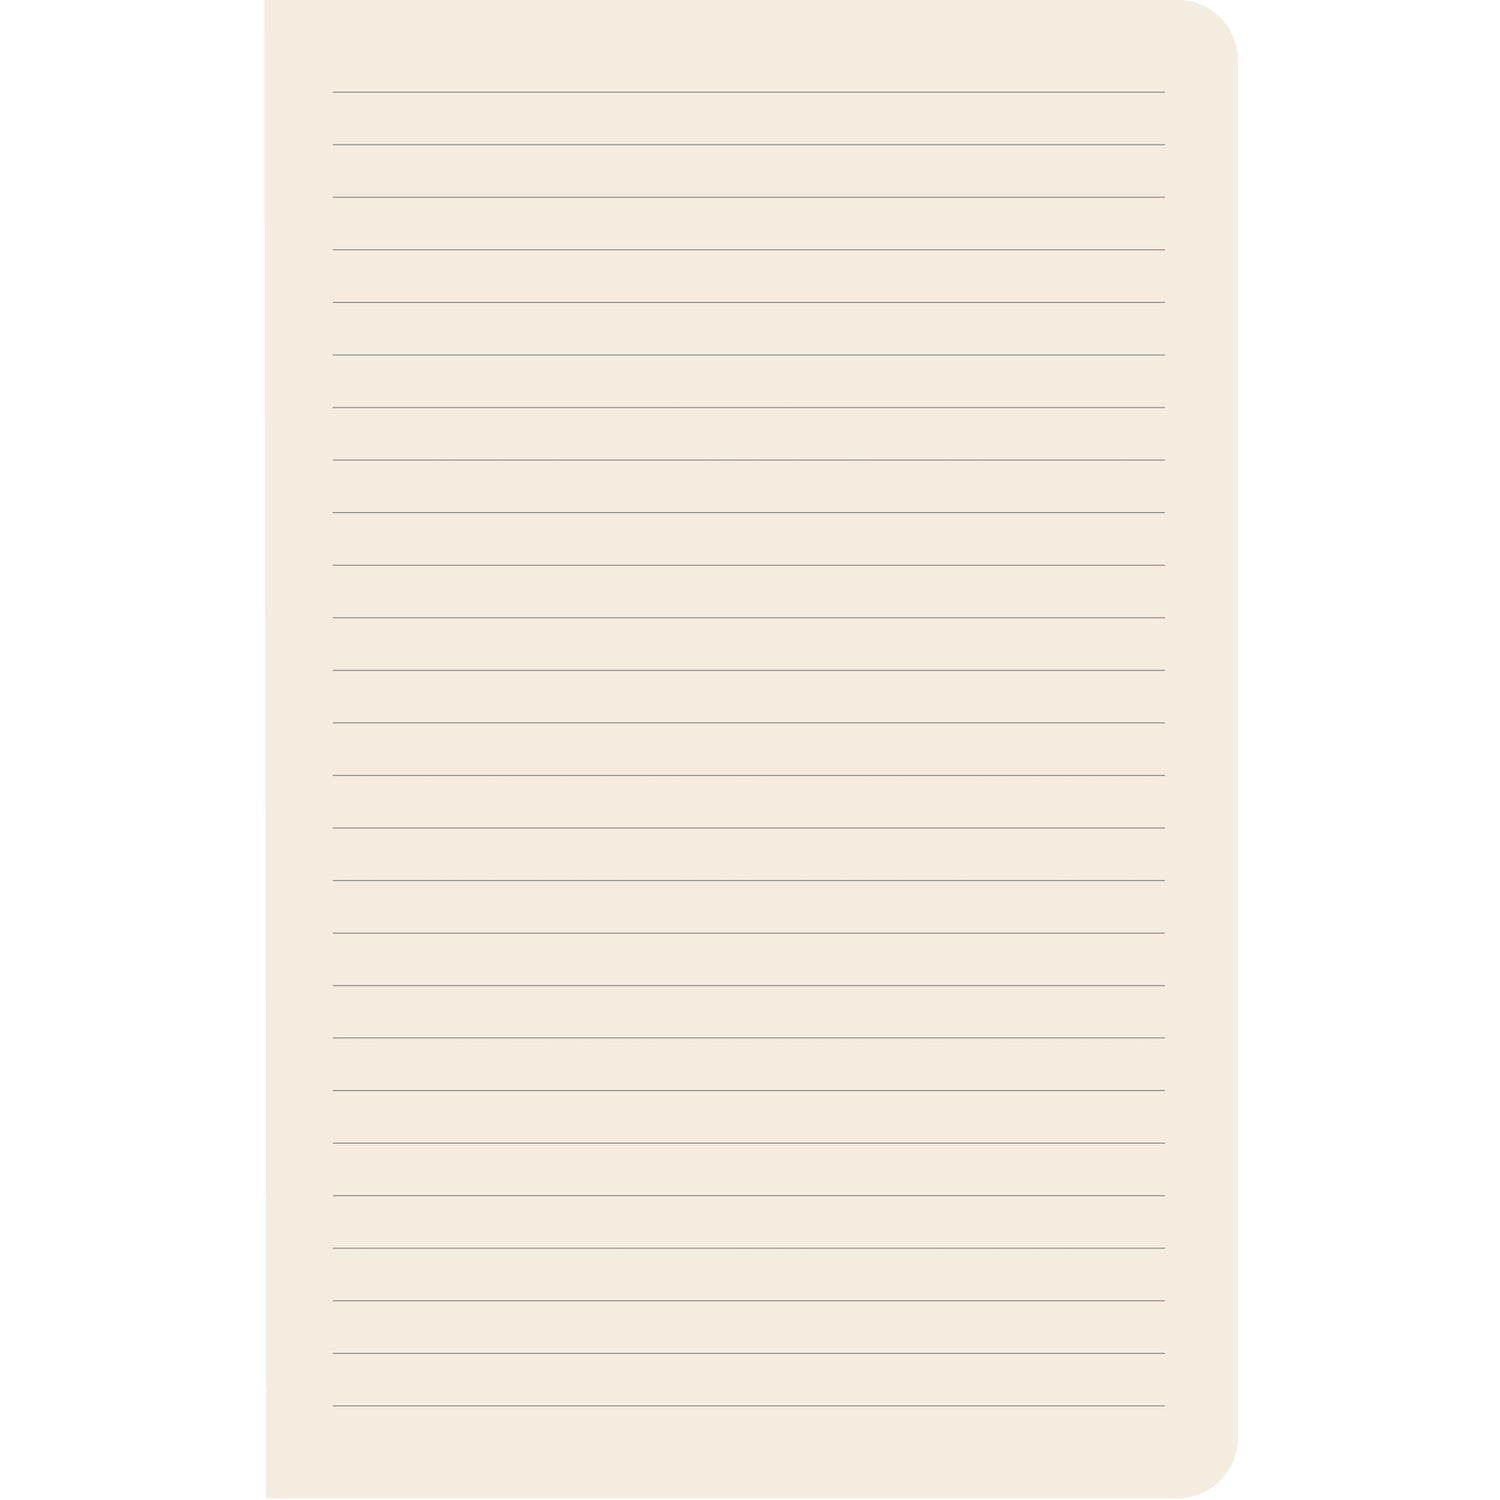 The pages of the Magnipheasant Ideas Notebook are cream with black lines for easy writing.